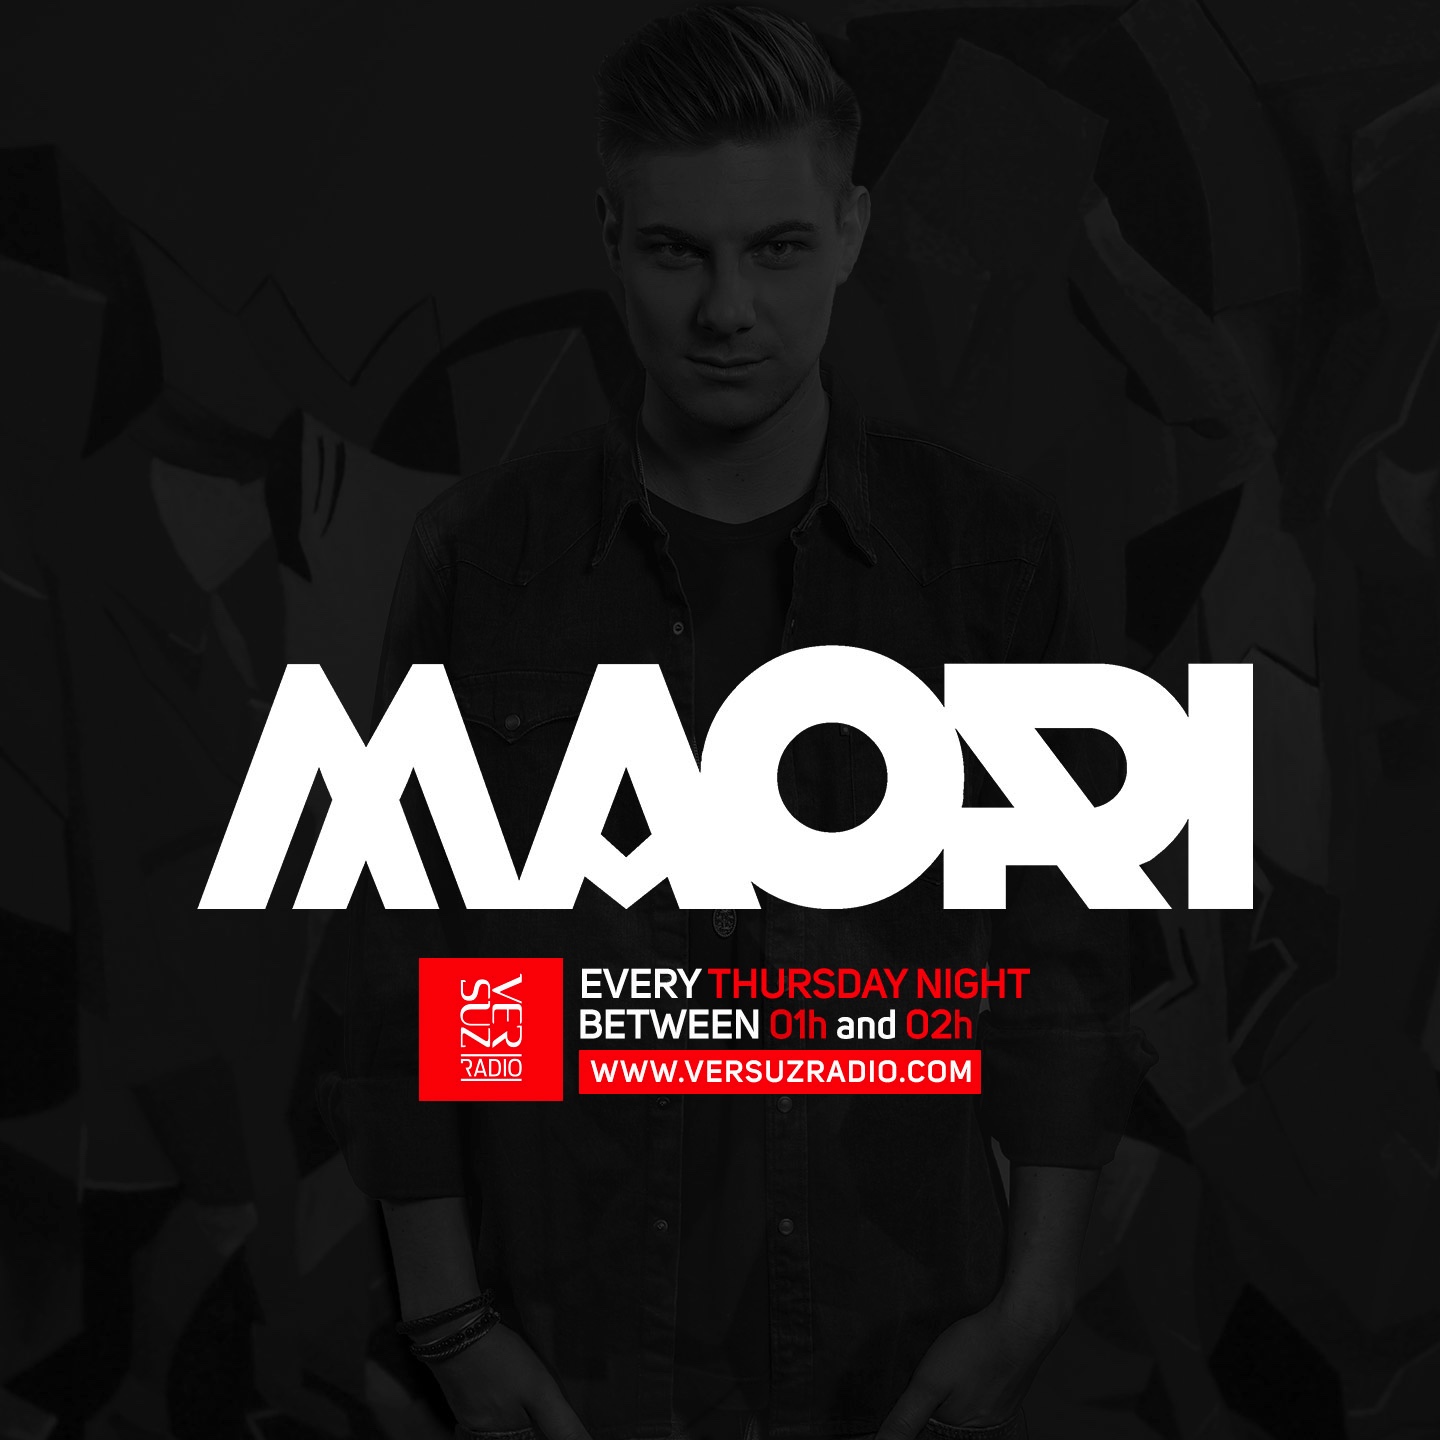 Clubhouse Radio by Maori - Episode #014